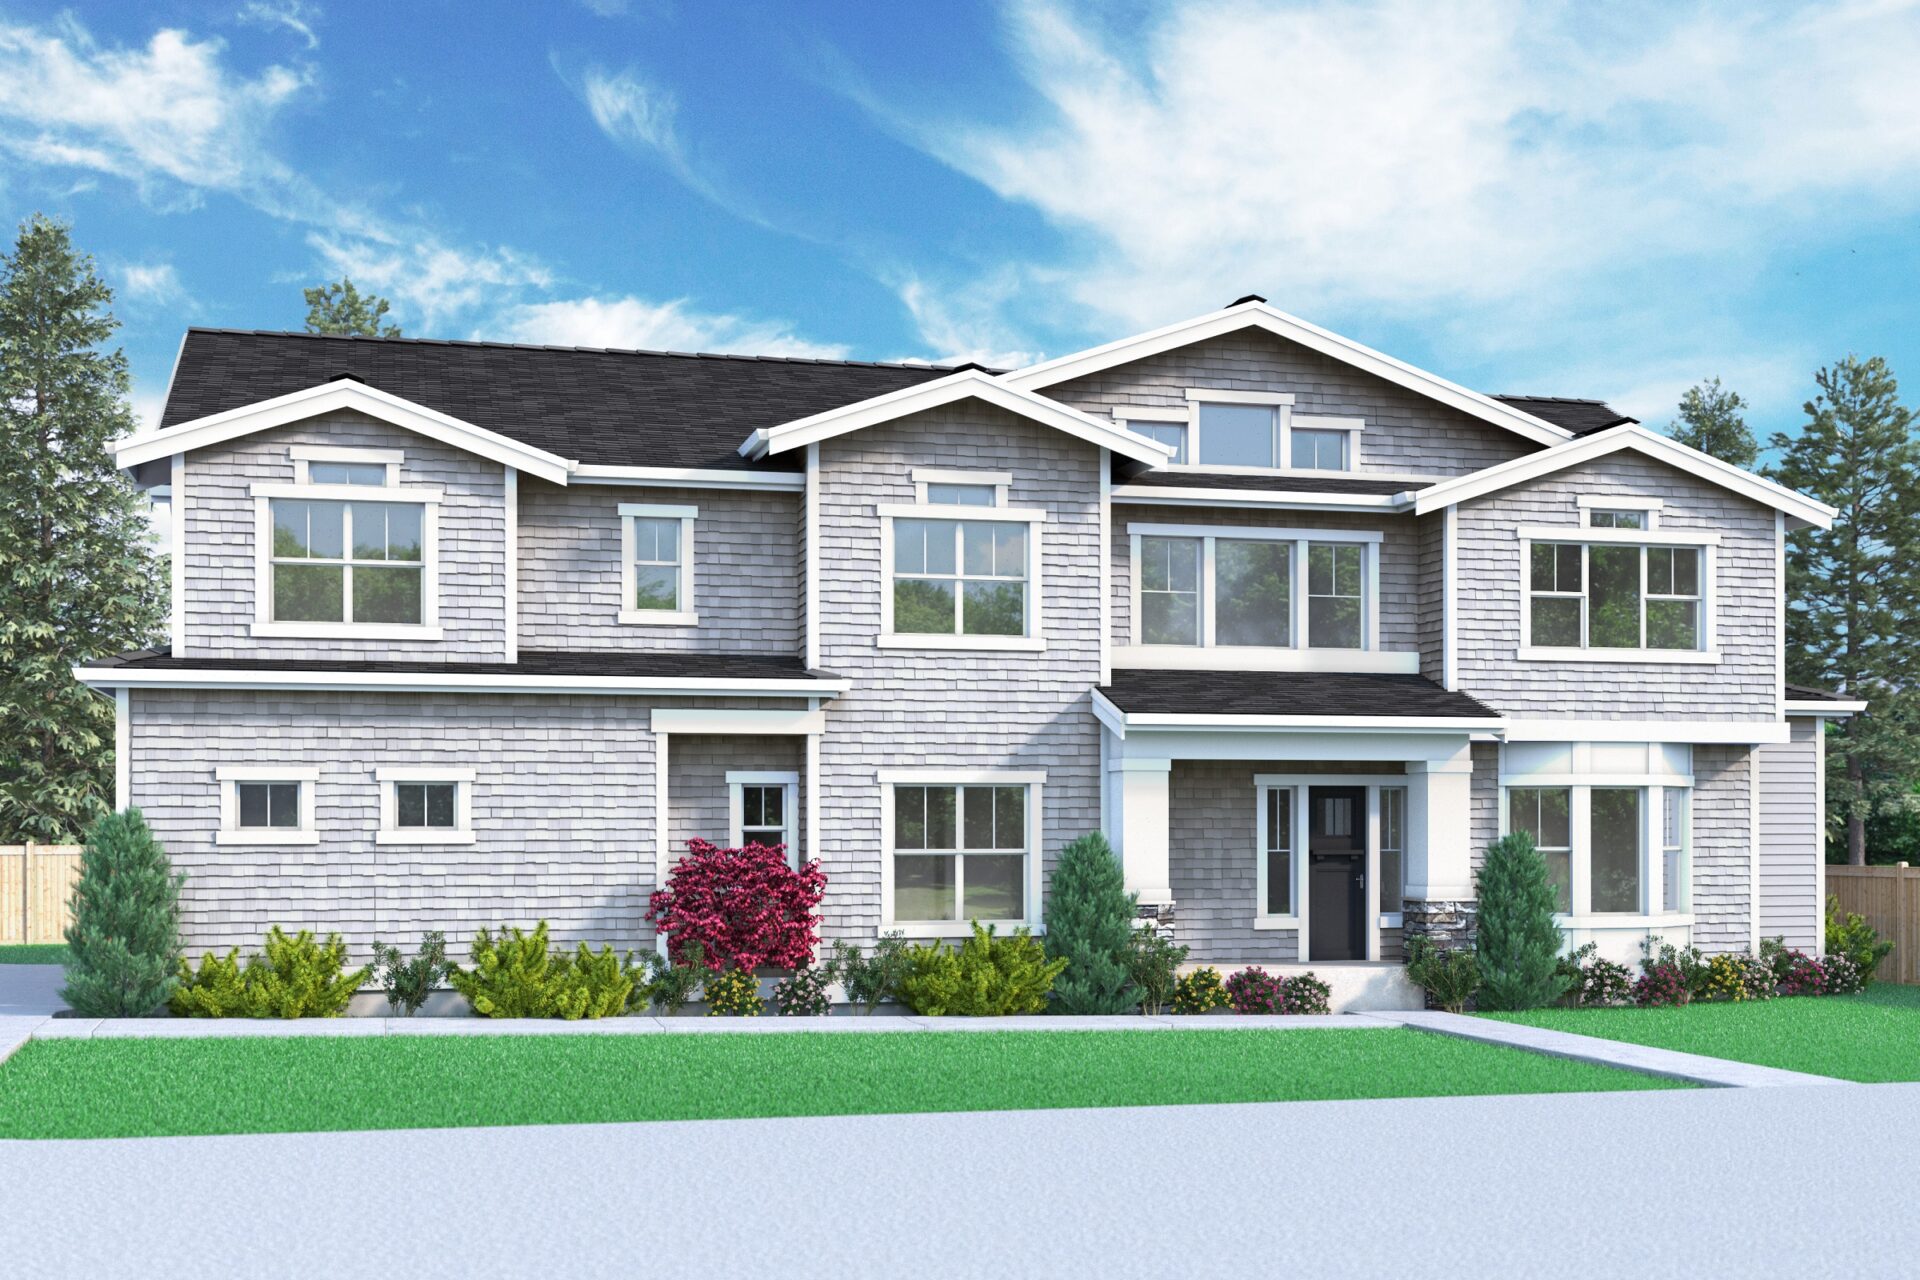 View our new luxury home construction on 3863 142nd Pl SE, in Bellevue, WA from MN Custom Homes